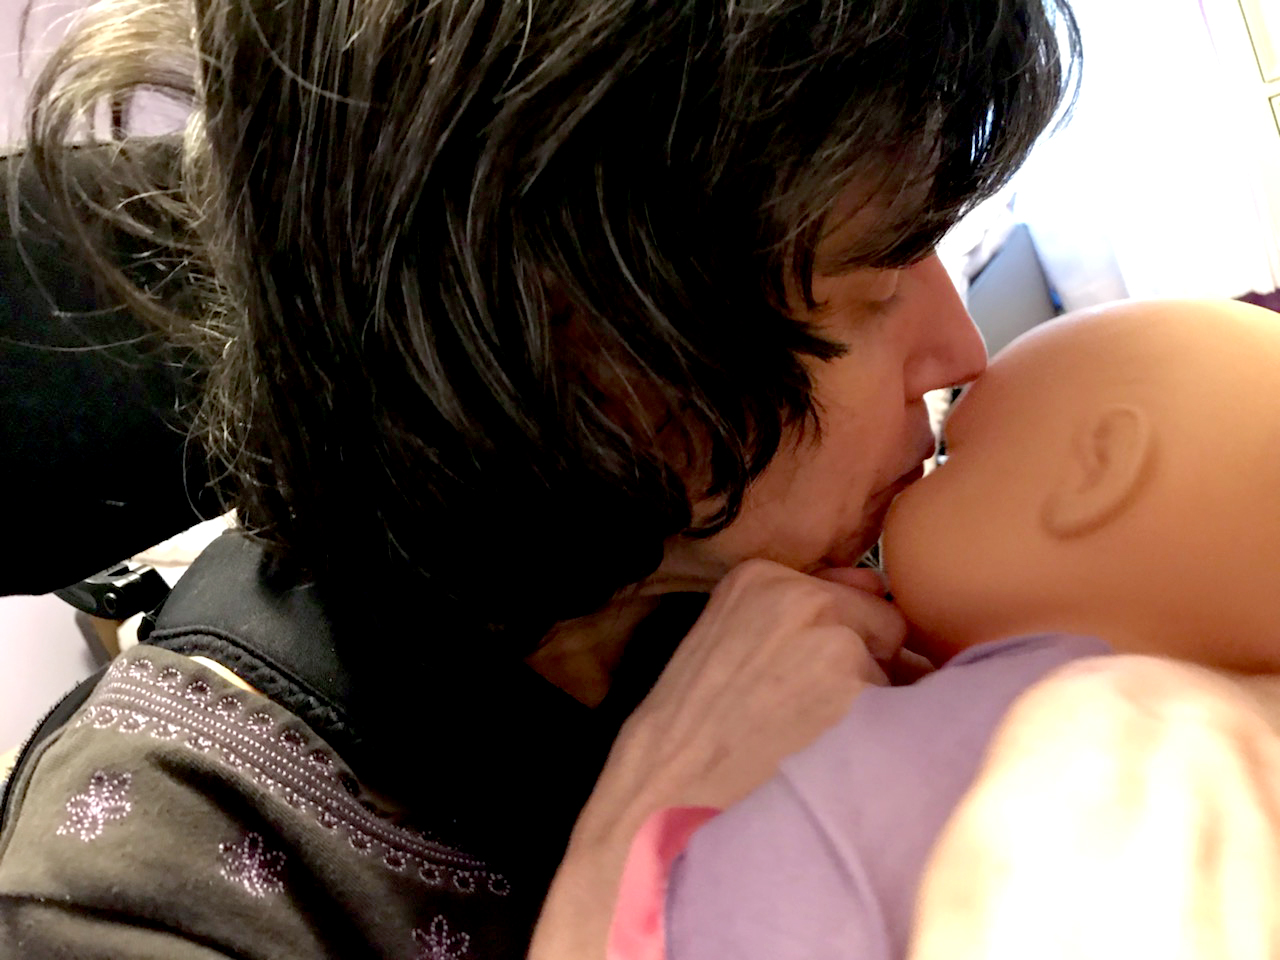 Woman with dark hair gently kisses baby doll